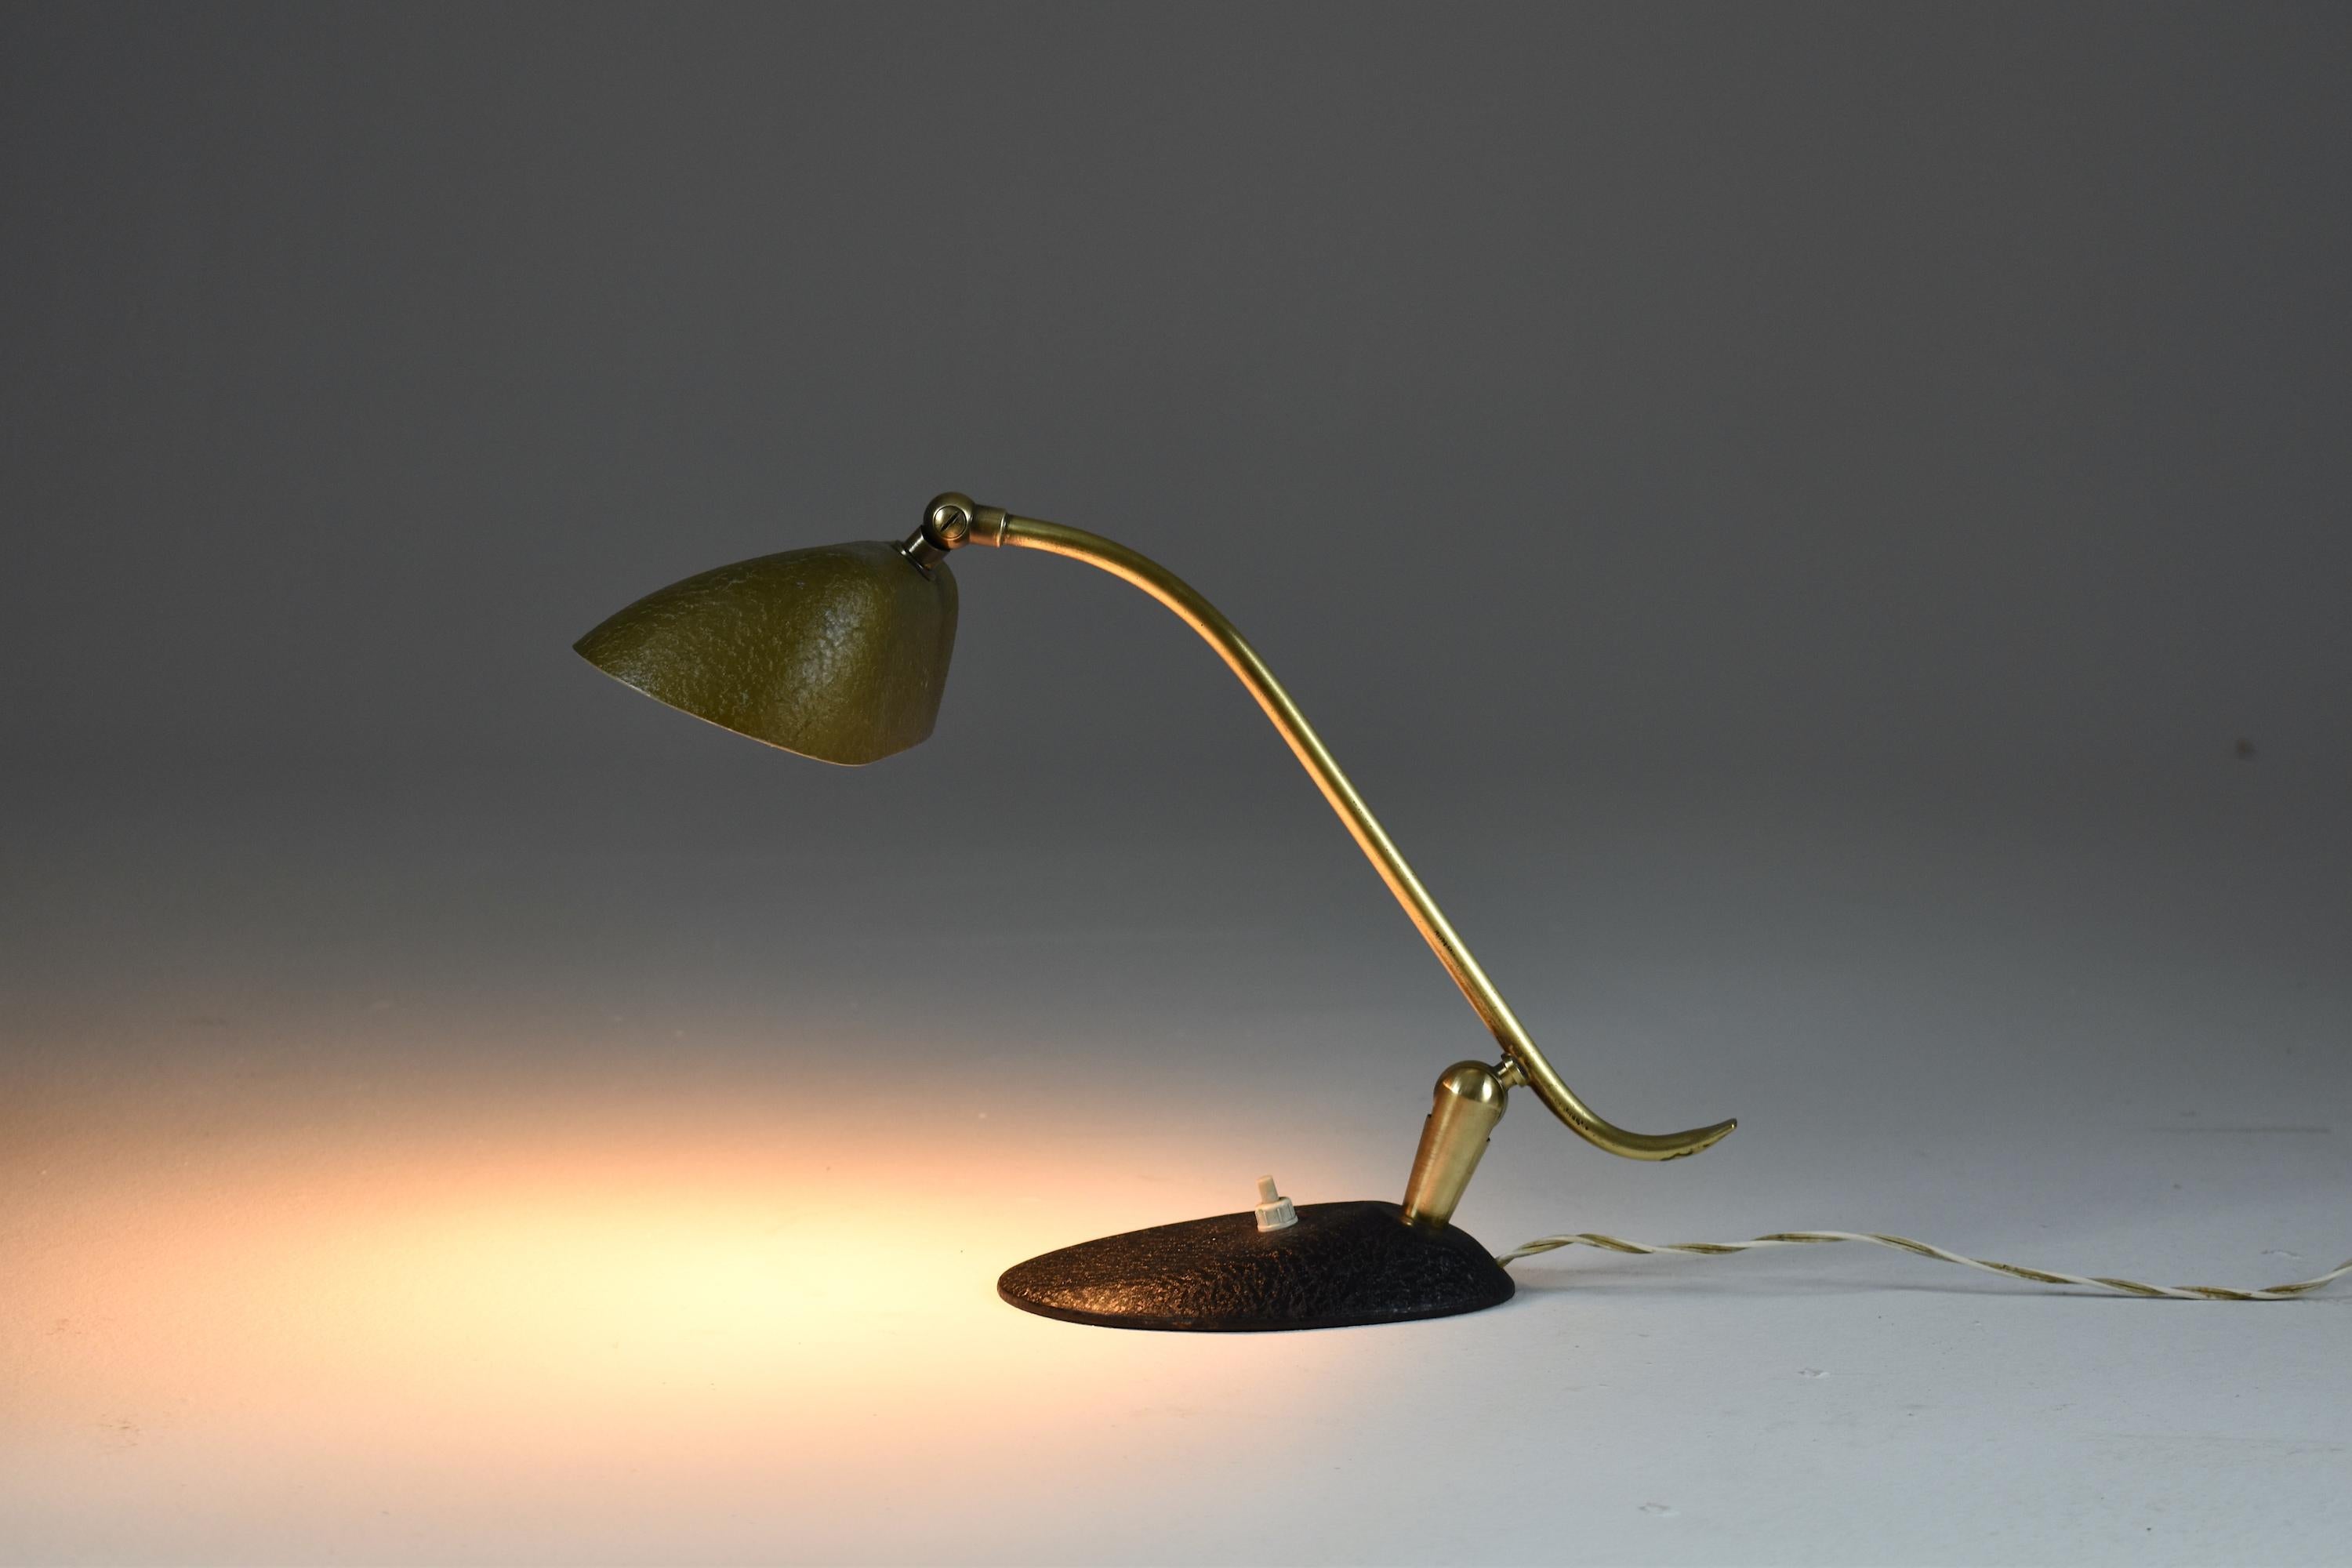 A beautiful 20th-century vintage table or desk lamp composed of an aluminum shade, a black lacquered steel base, and a slender brass stem. This light rotates at the shade and stem and is designed with a push-type light switch on the base.